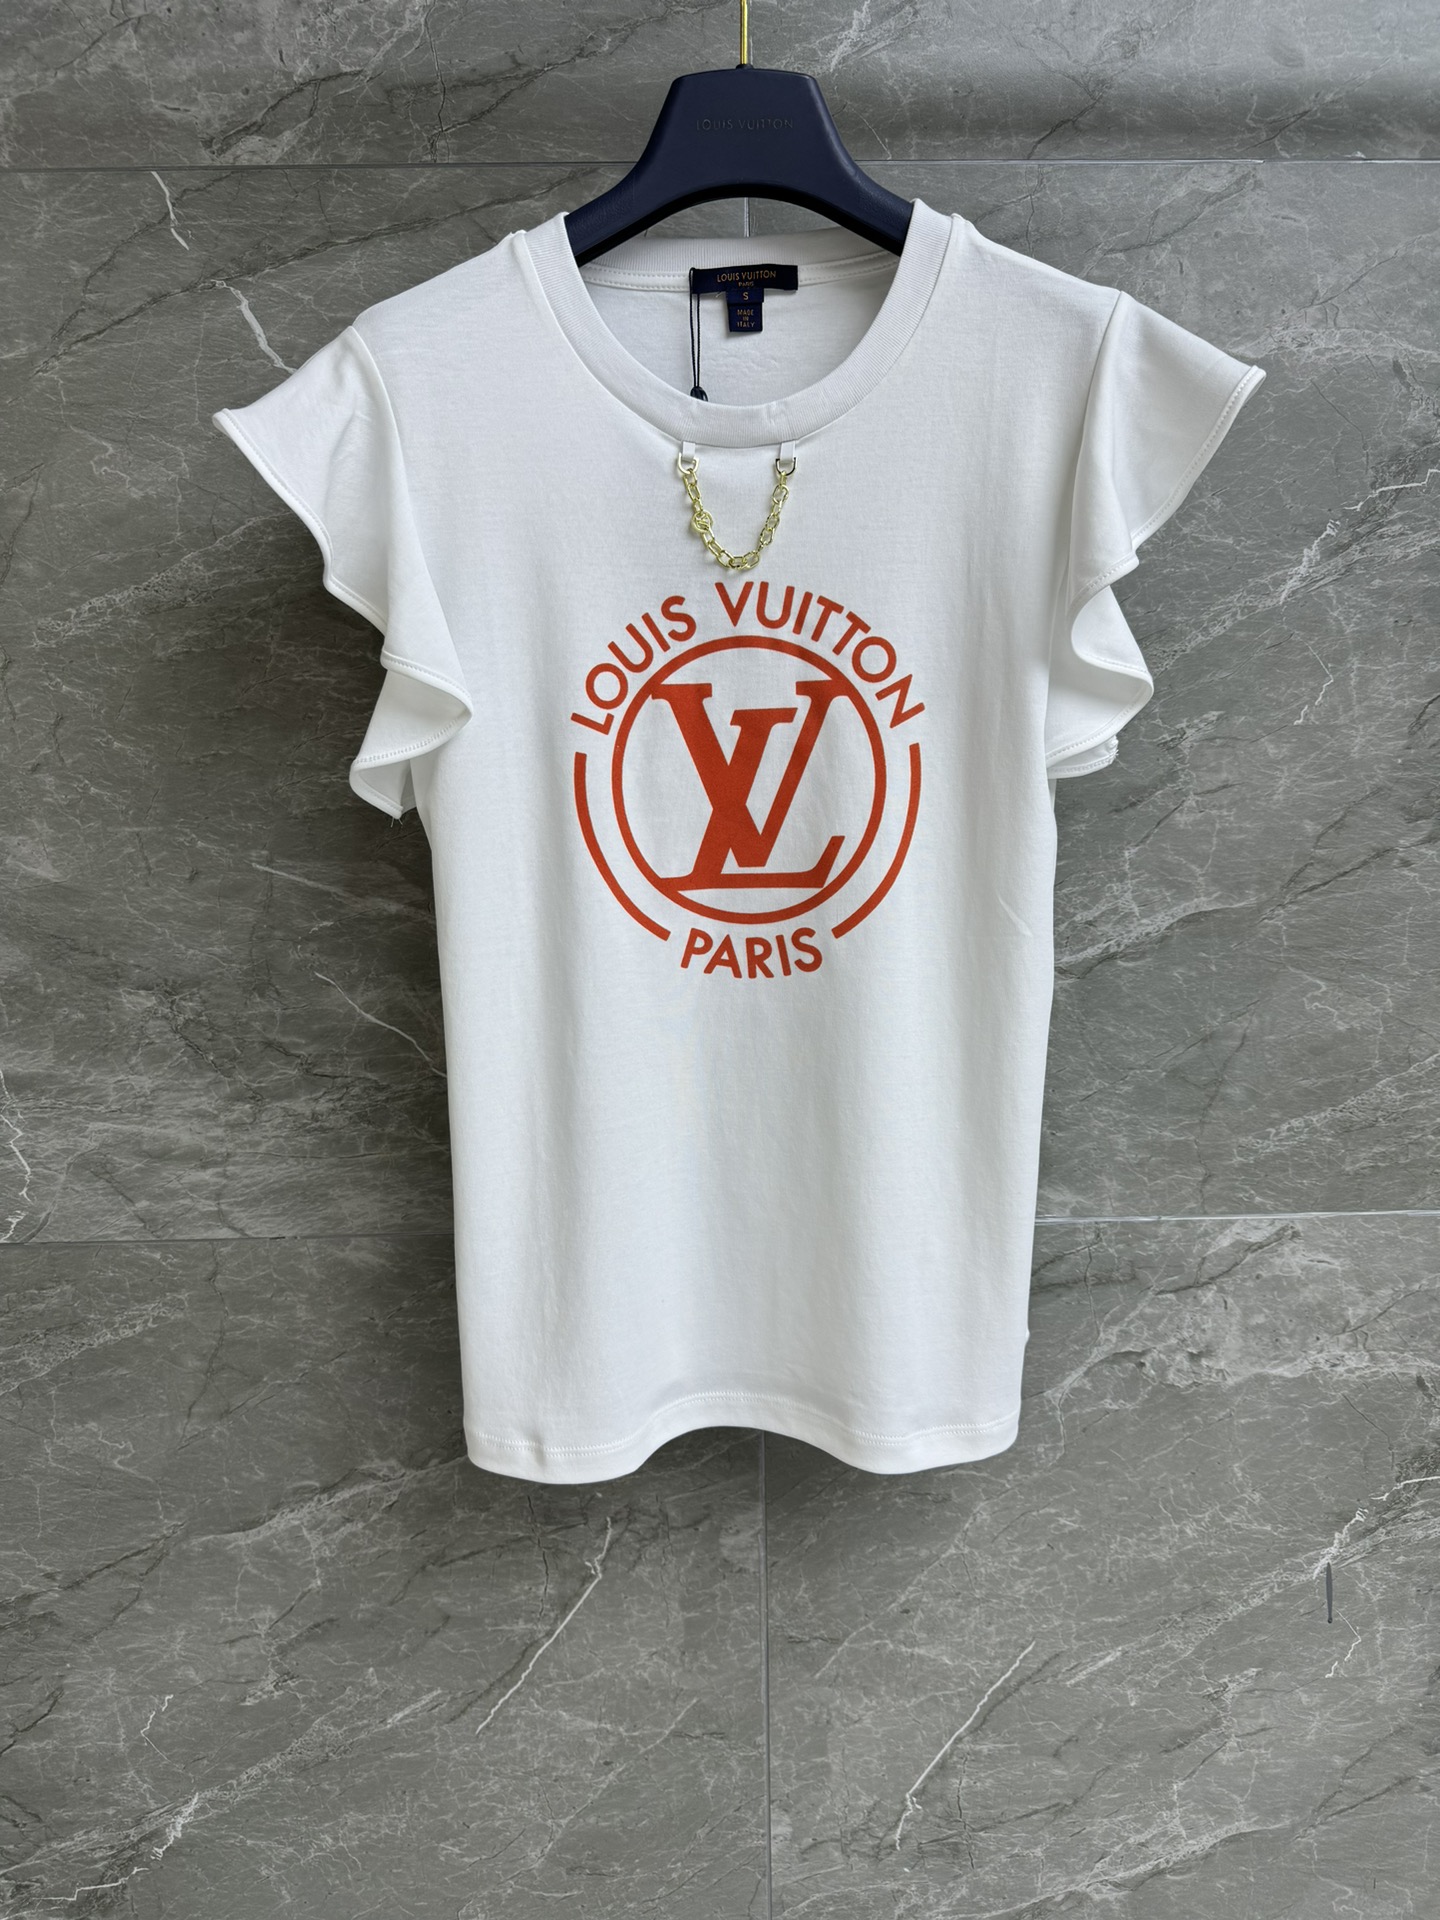 Louis Vuitton Clothing T-Shirt Cotton Spring/Summer Collection